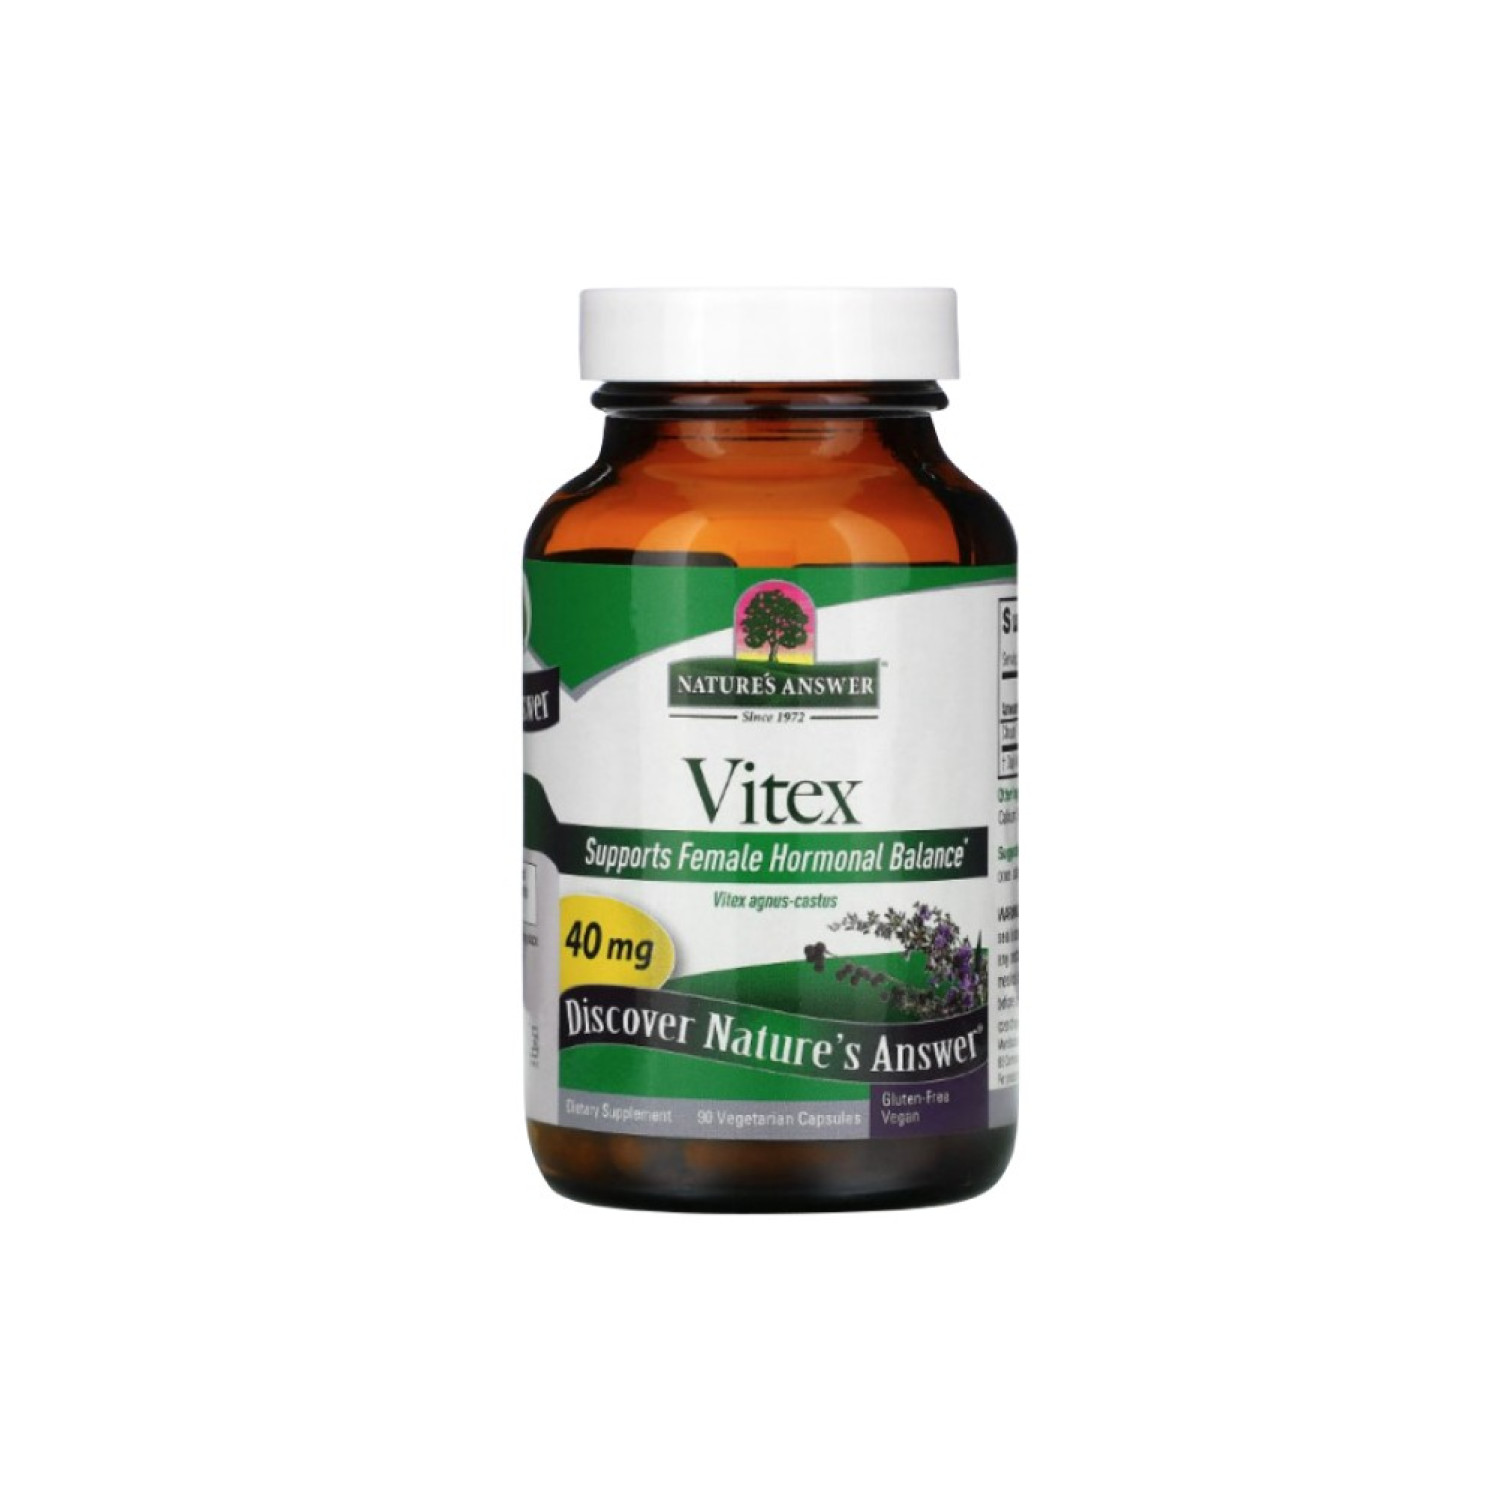 Natures Answer Natures Answer Vitex